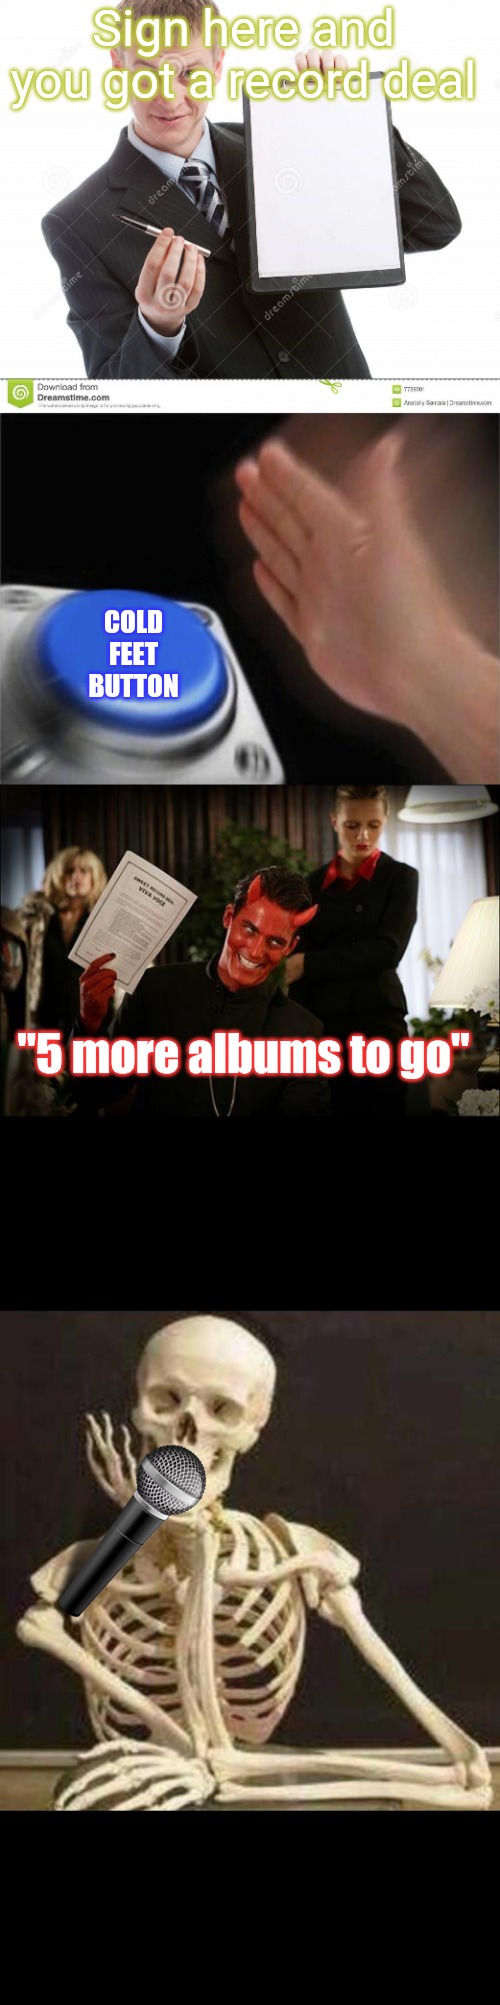 Signed for life | Sign here and you got a record deal; COLD FEET BUTTON; "5 more albums to go" | image tagged in contract,memes,blank nut button,contractwiththedevil,skeleton waiting | made w/ Imgflip meme maker